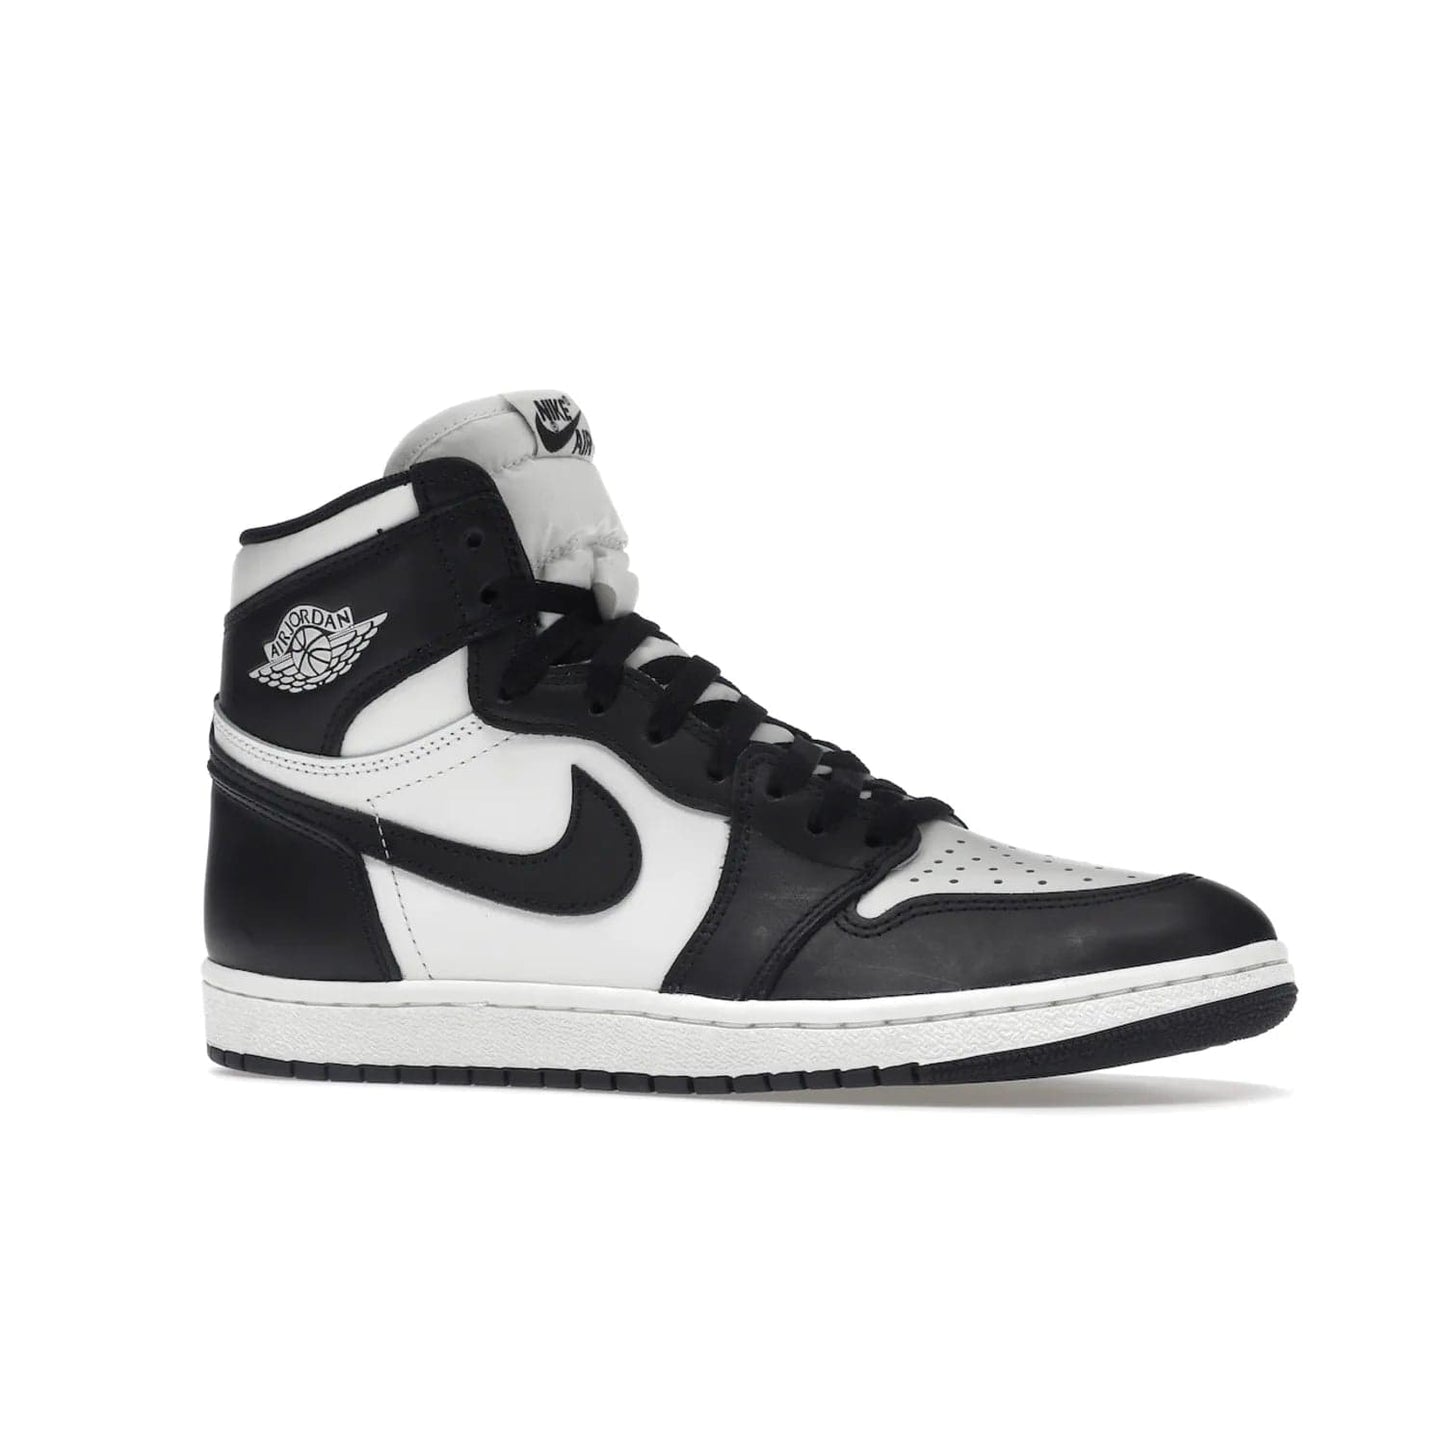 Jordan 1 Retro High 85 Black White (2023) - Image 3 - Only at www.BallersClubKickz.com - Brand new Jordan 1 Retro High 85 Black White (2023) now available. A classic color scheme of black and white leather uppers with signature Nike Air logo on the tongue. Must-have for any Air Jordan fan. Available February 15, 2023.